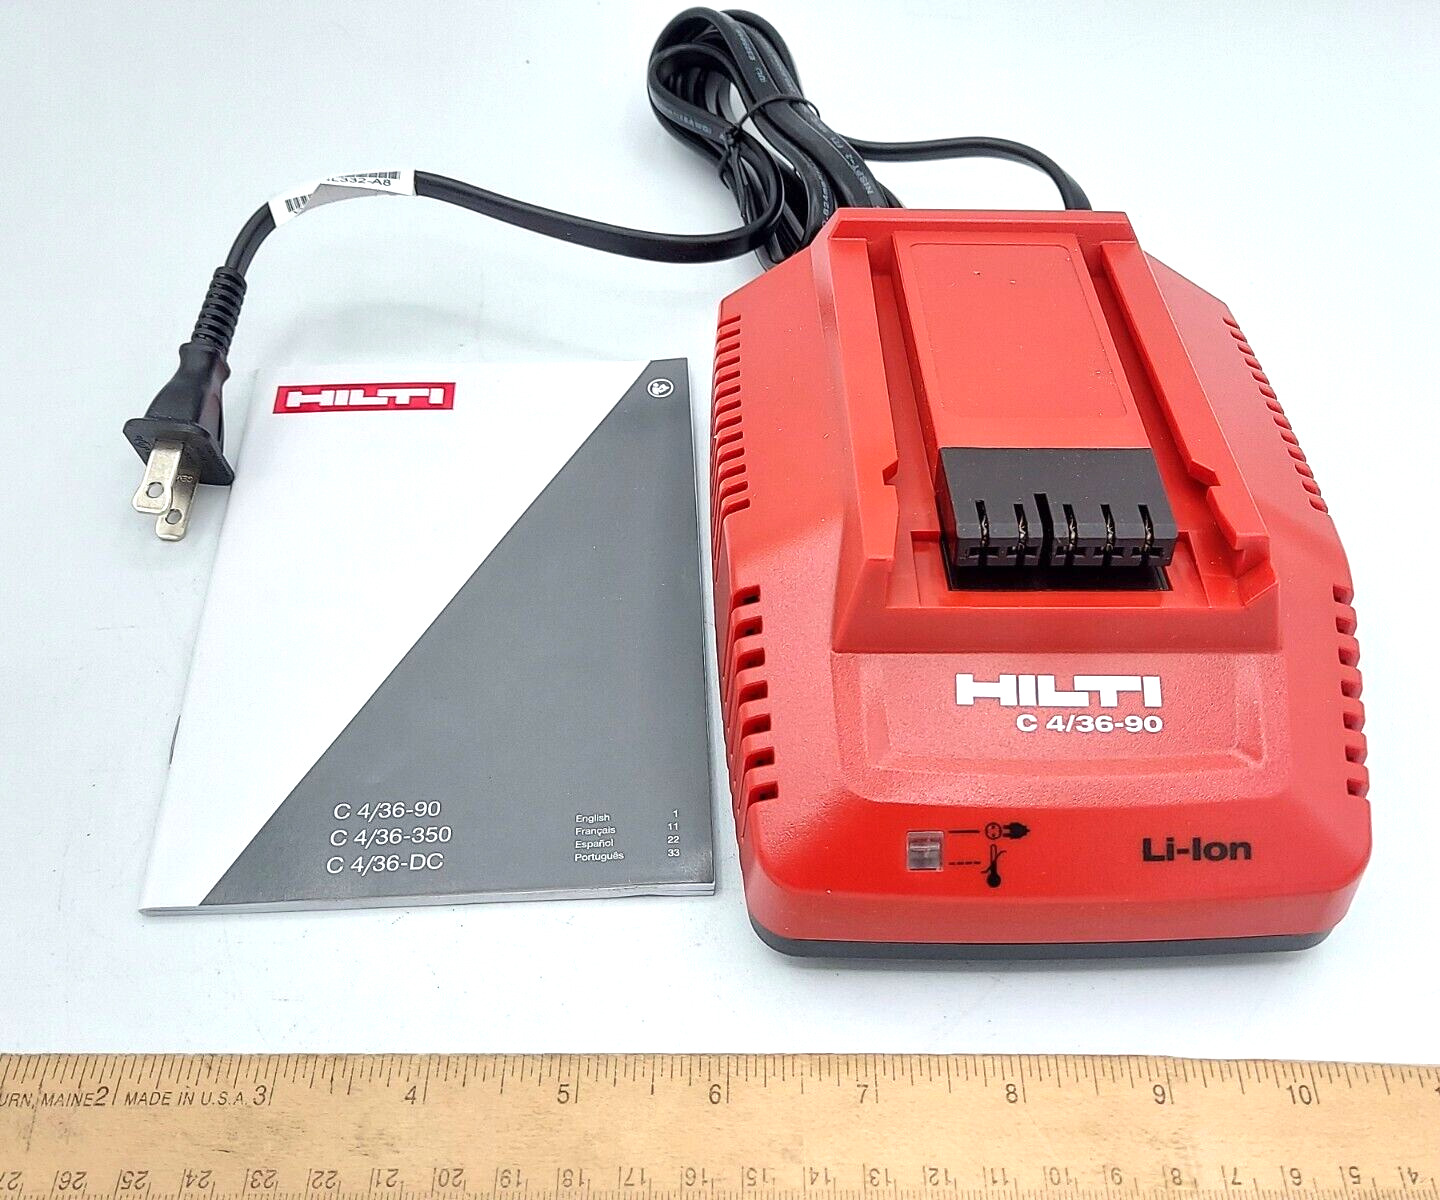 Hilti C 4/36-90 Multi-Voltage Compact Charger for Li-ion Batteries U.S. Shipping